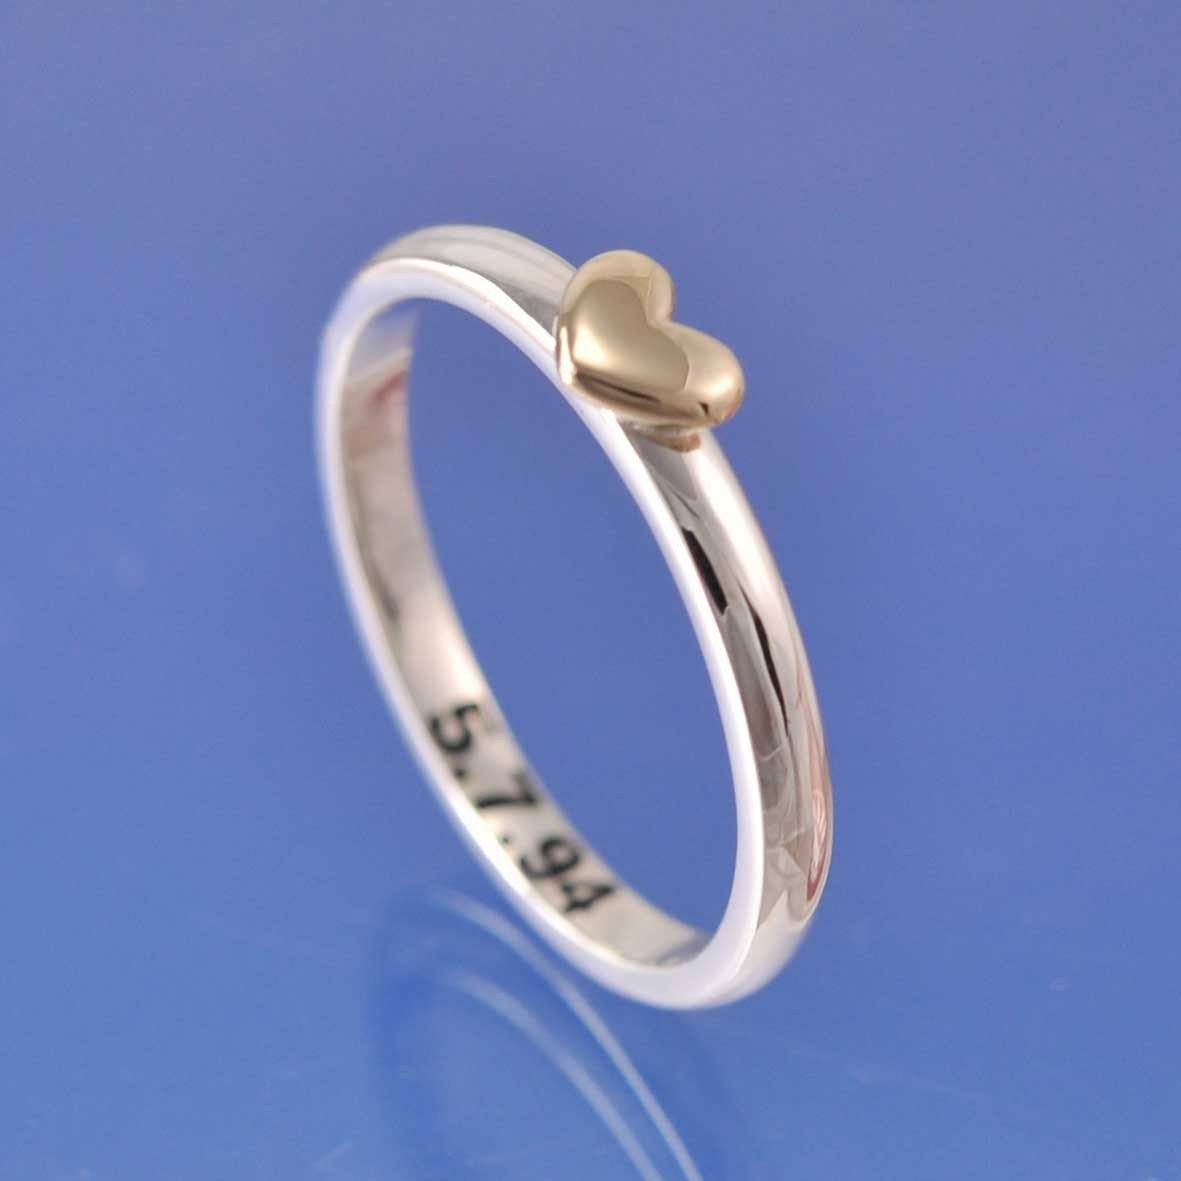 Bulbous Heart Personalised Ring Ring by Chris Parry Jewellery